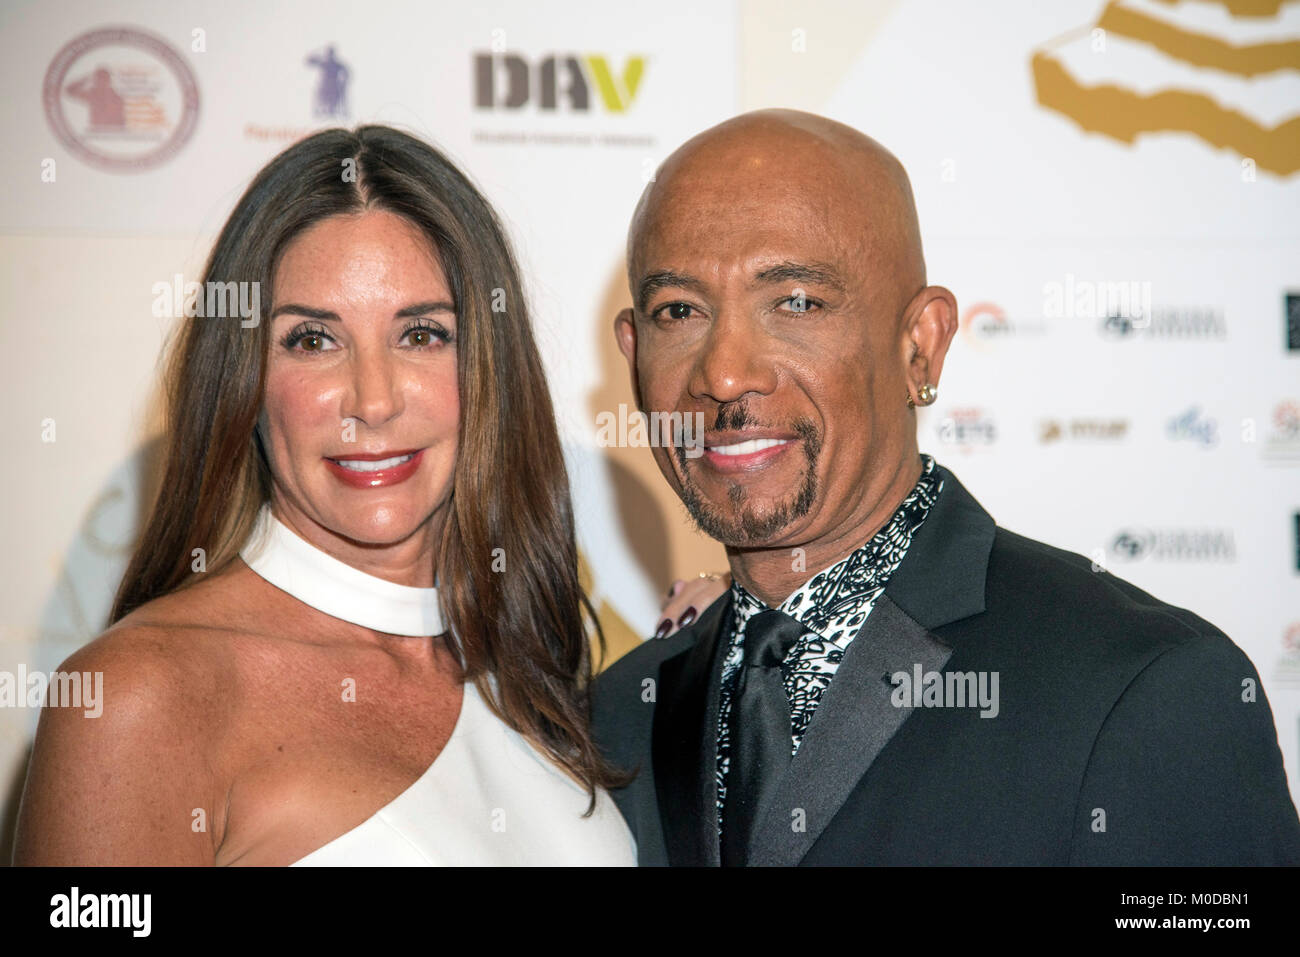 Washington, DC, USA. 20th Jan, 2018. Montel Williams, Tara Williams at The Academy of United States Veterans and Coalition to Salute America's Heroes 2018 Veteran Awards at The Mayflower Hotel in Washington, DC on January 20, 2018. Credit: Patsy Lynch/Media Punch/Alamy Live News Stock Photo